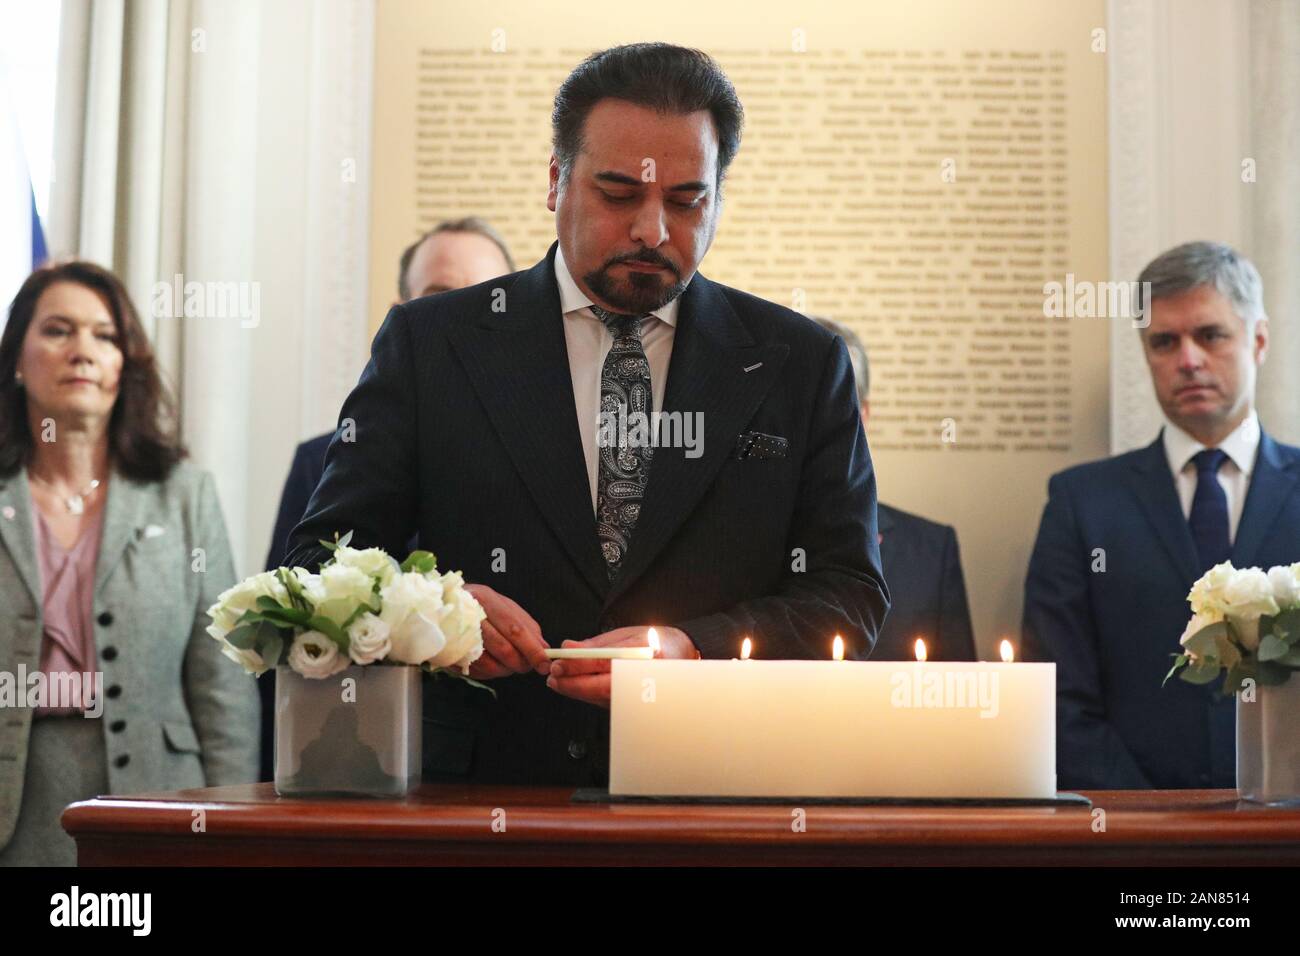 Idrees Zaman, Acting Foreign Minister for Afghanistan, lights a candle at Canada House, central London for the passengers of the Ukrainian International Airlines flight that crashed just minutes after taking off from Imam Khomeini International Airport in Tehran, killing 176 people. Stock Photo